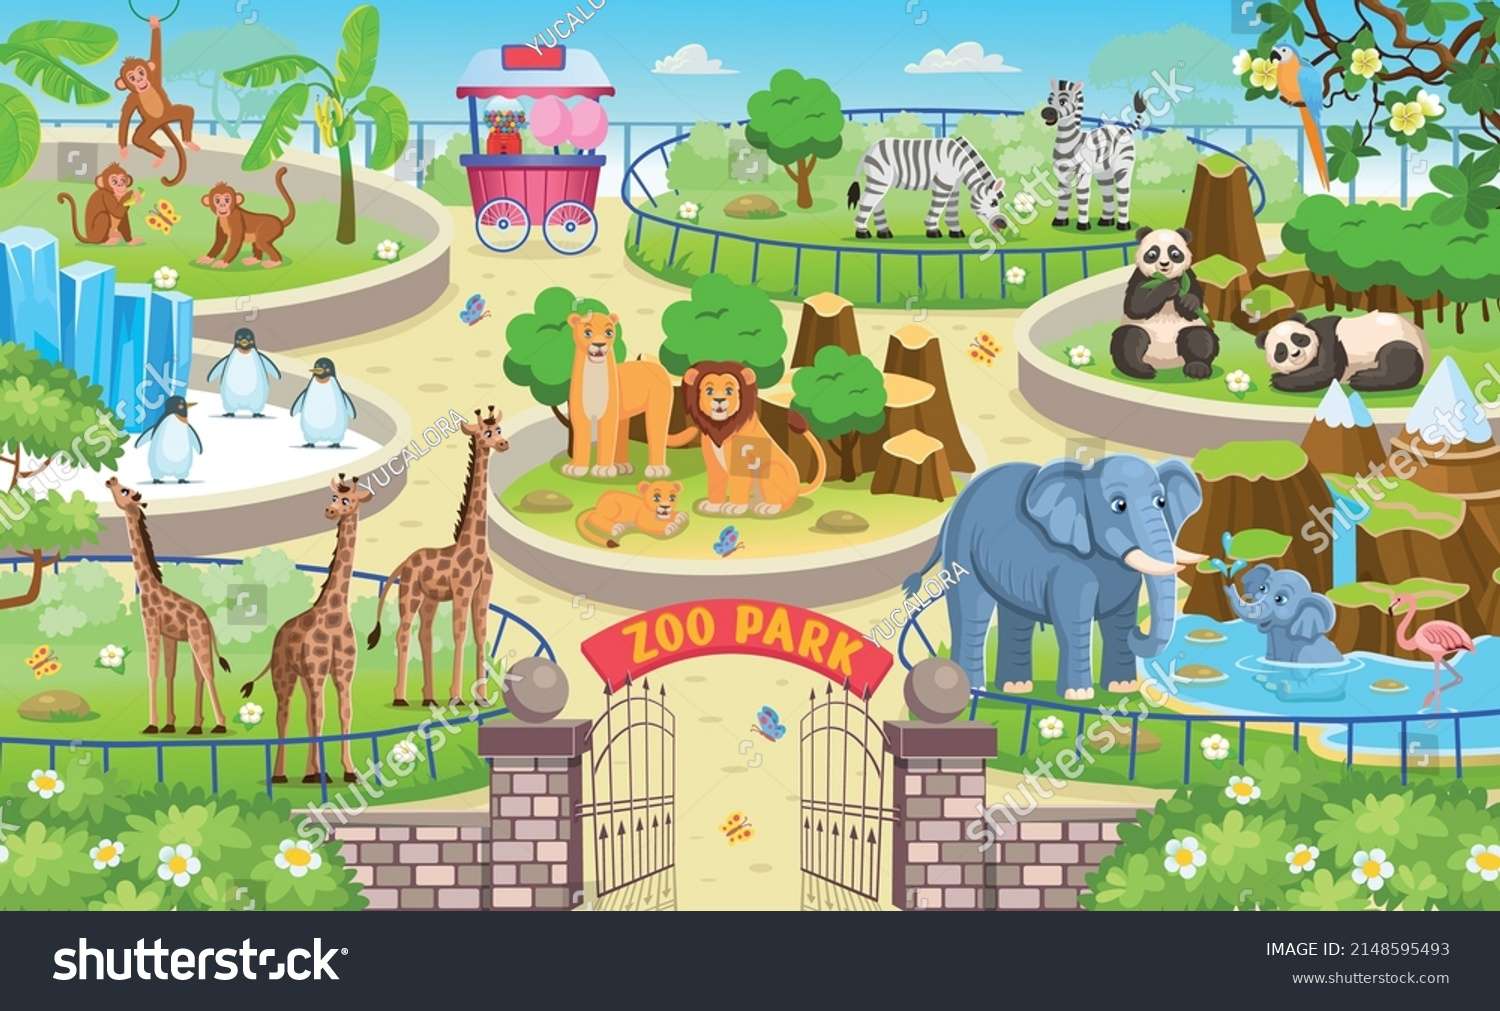 Puzzle for my kids to learn zoo. puzzle online from photo